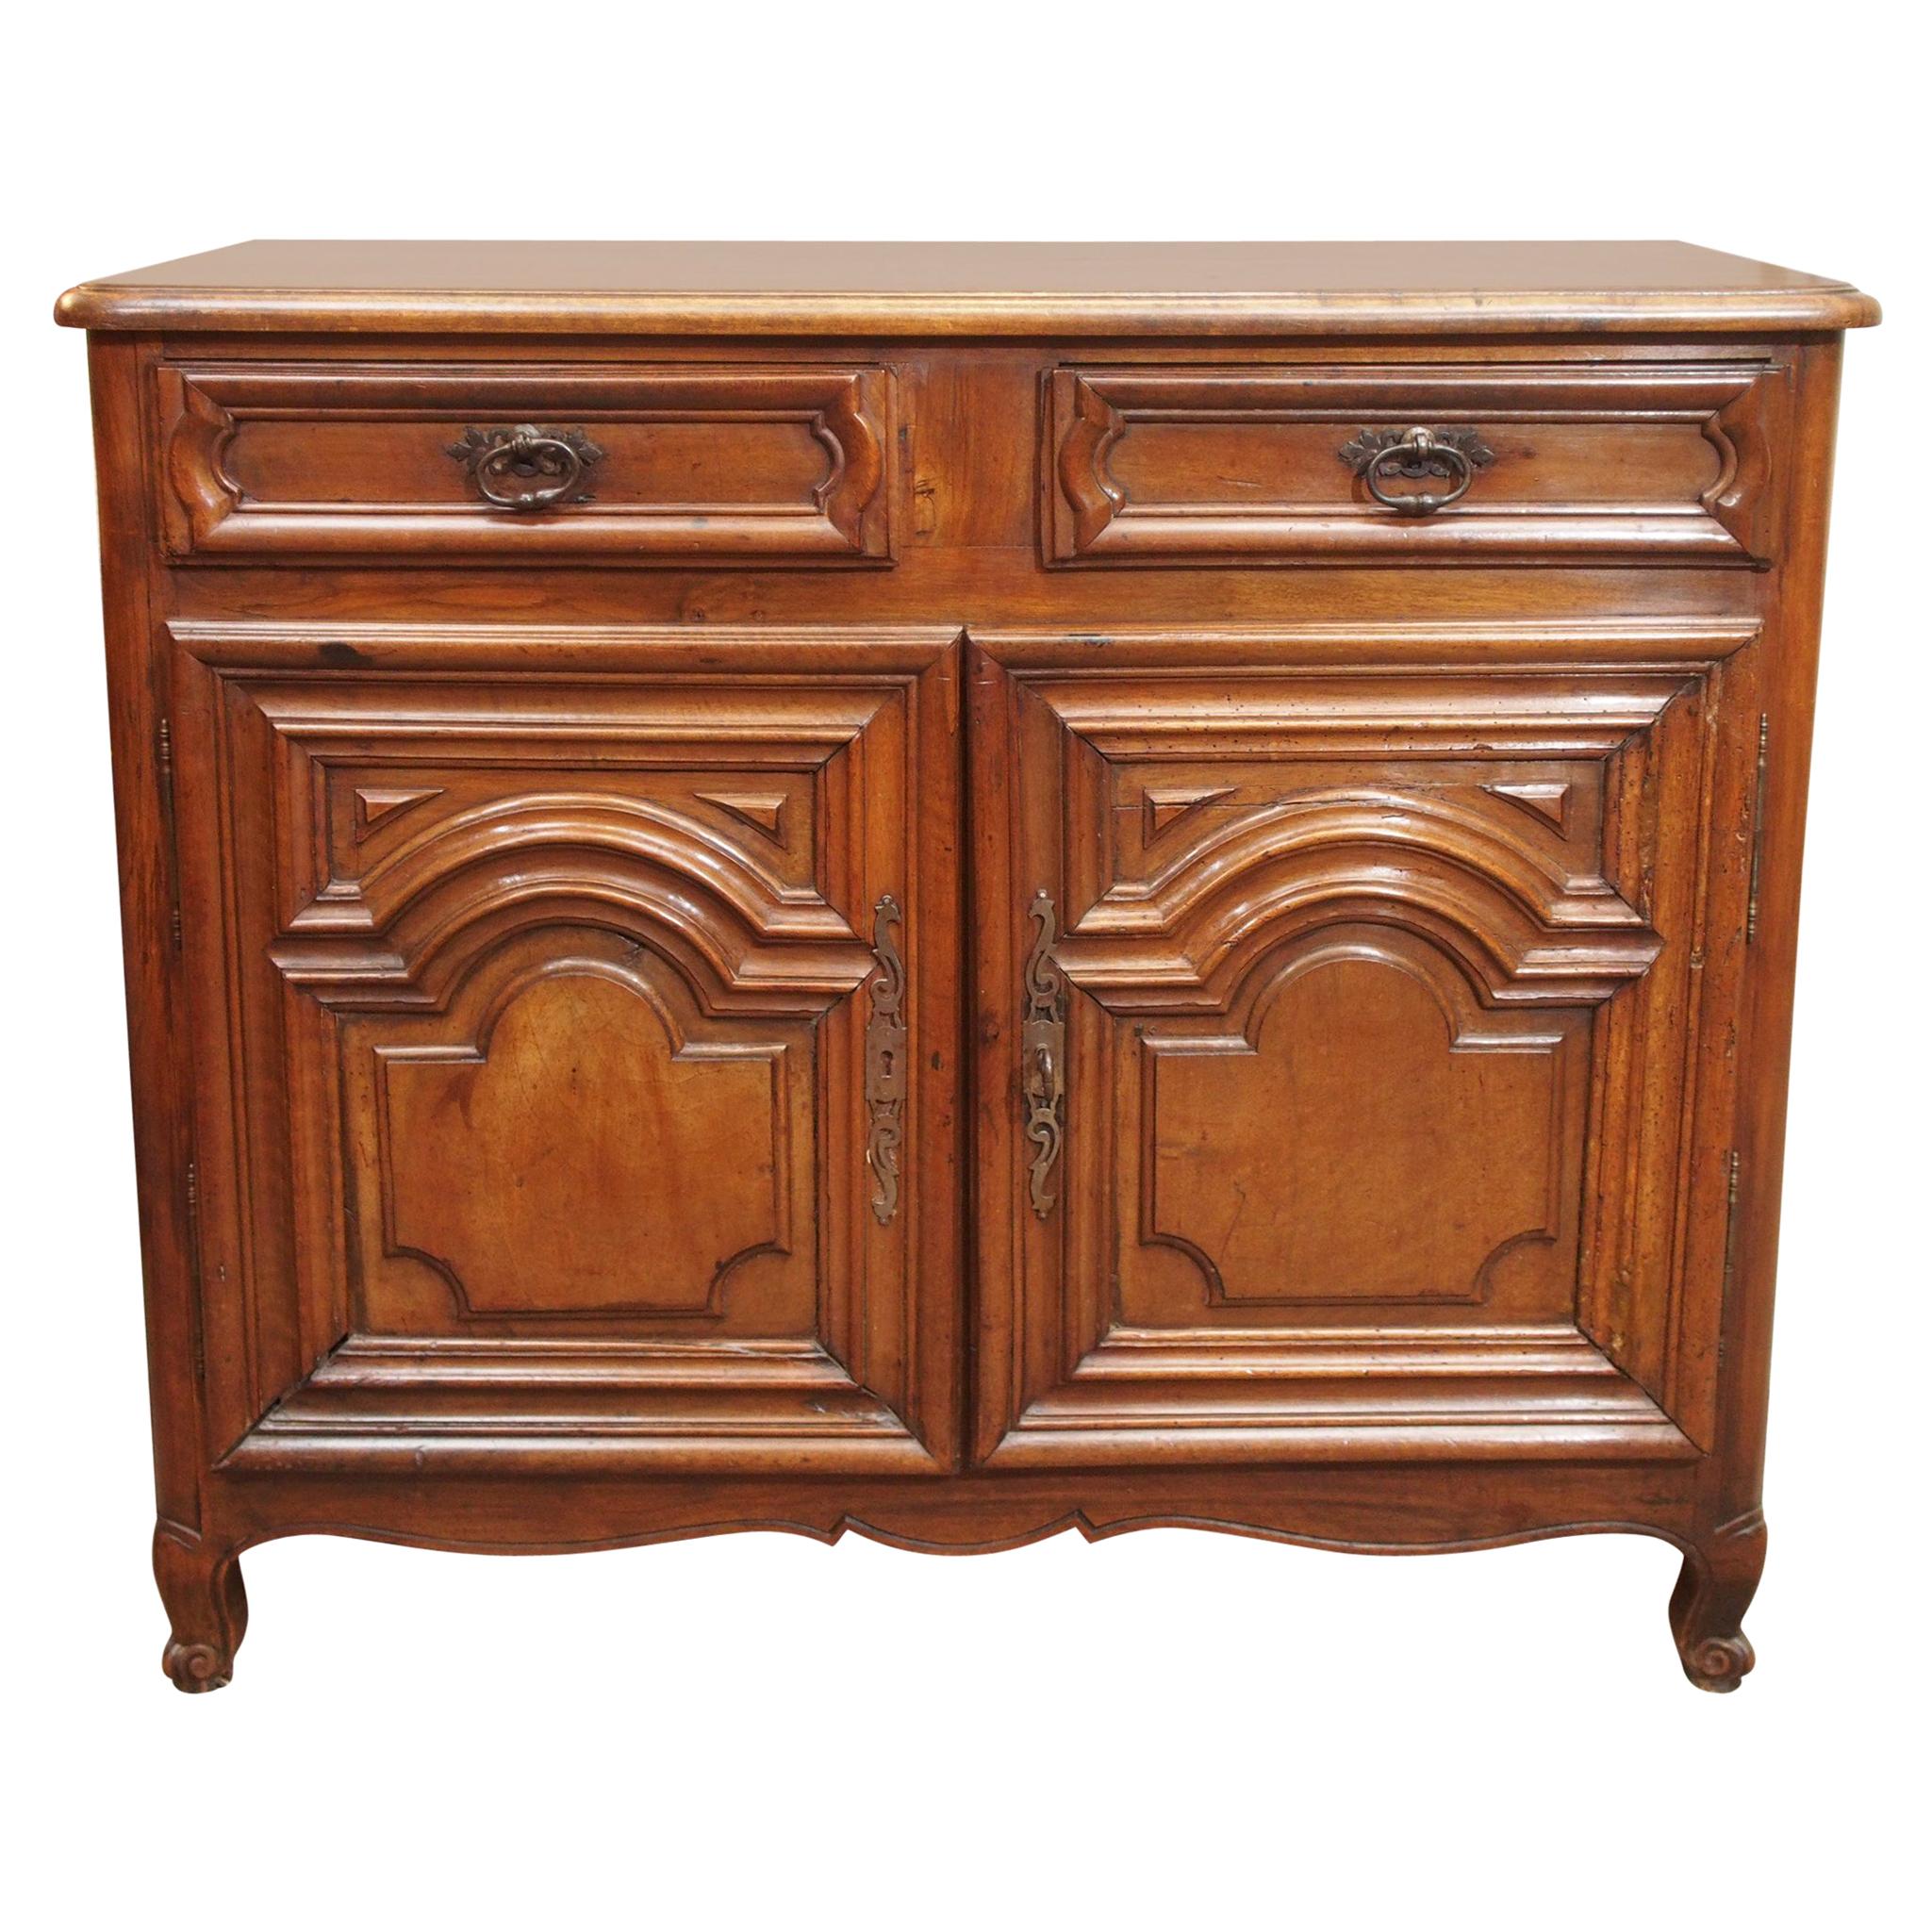 Antique French Provincial Small Walnut Cabinet